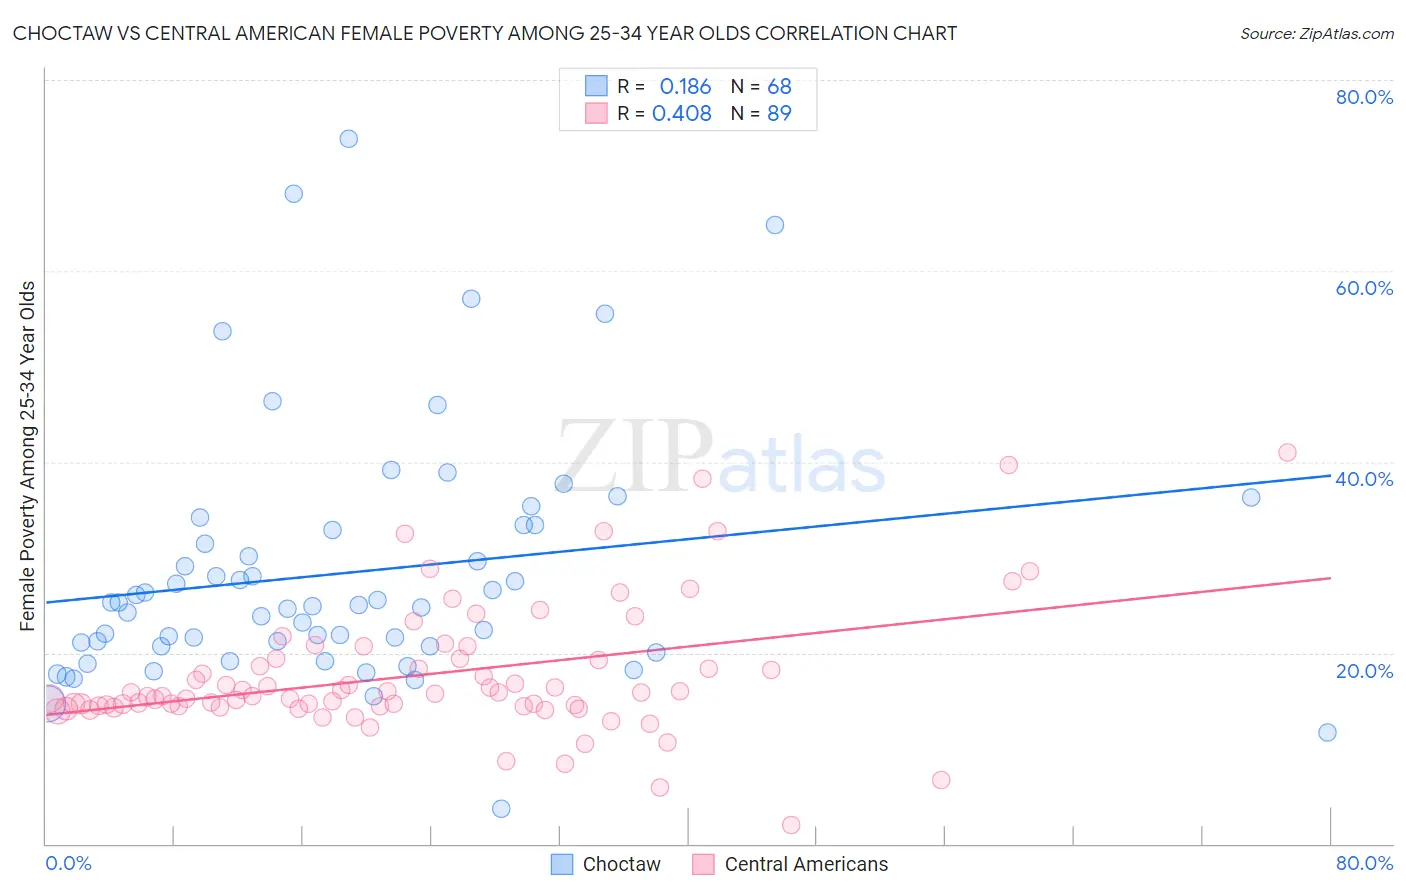 Choctaw vs Central American Female Poverty Among 25-34 Year Olds